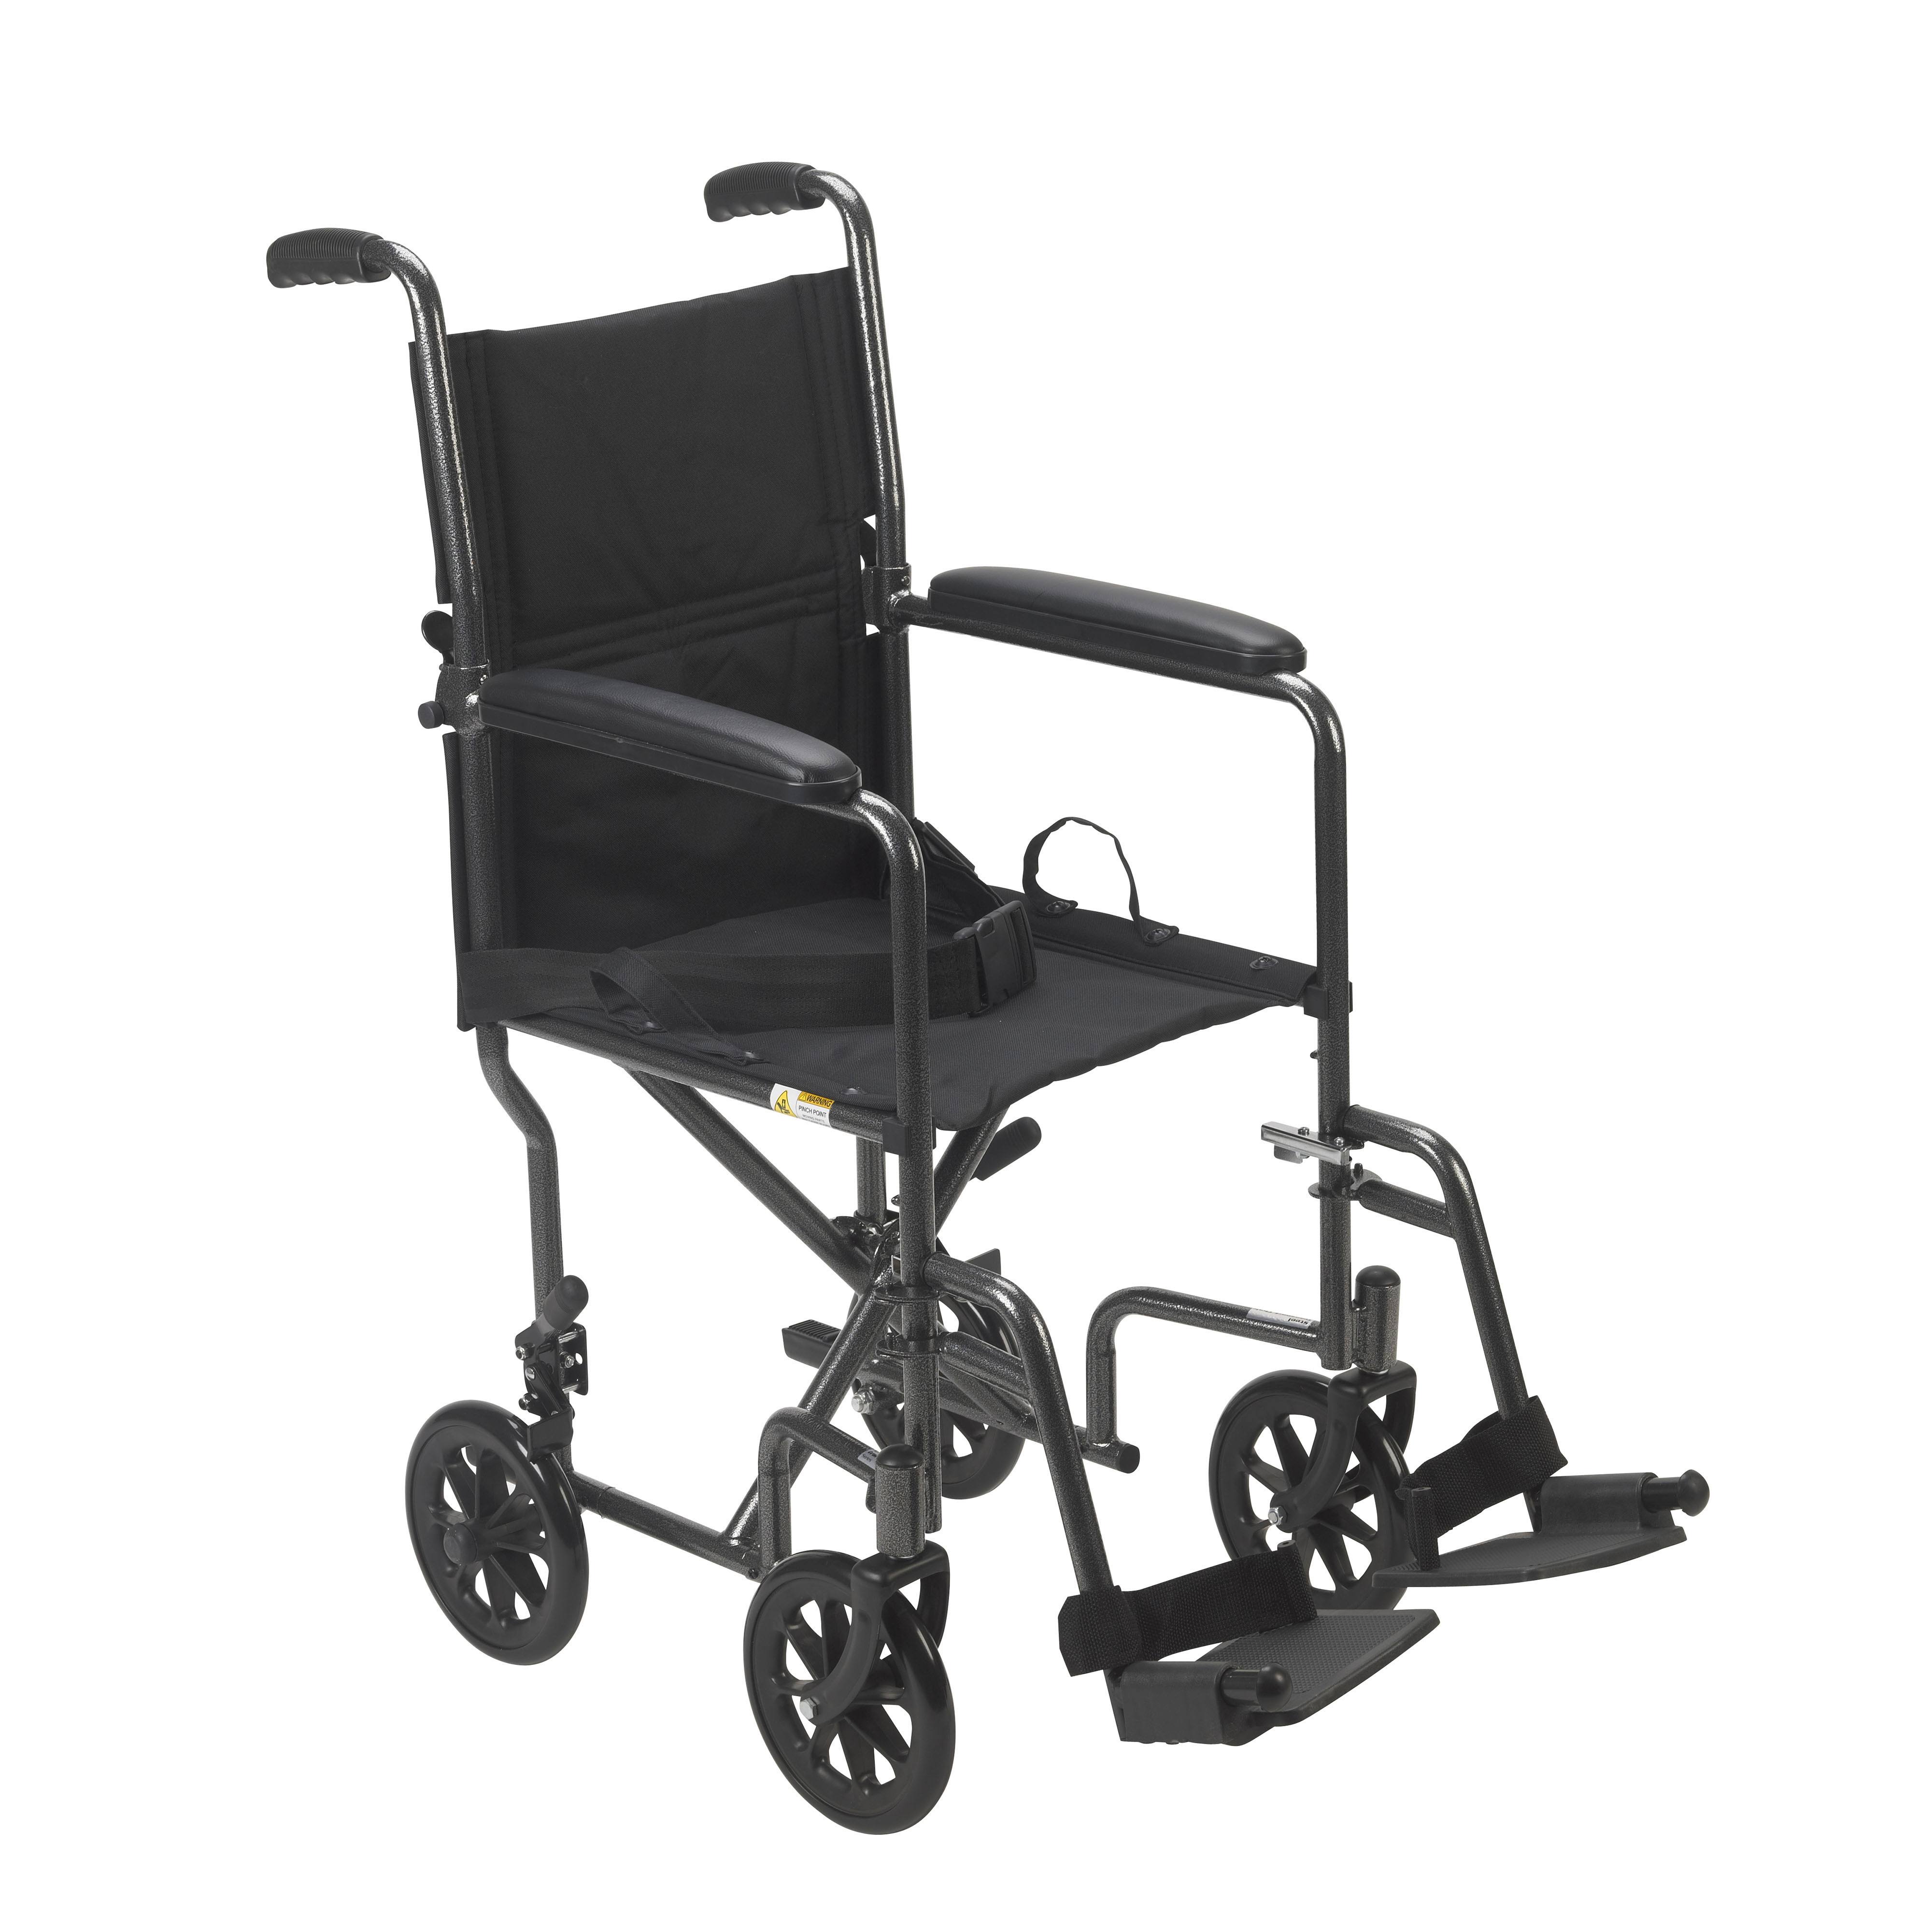 Drive TR39ESV Lightweight Steel Transport Wheelchair - with Fixed Full Arms